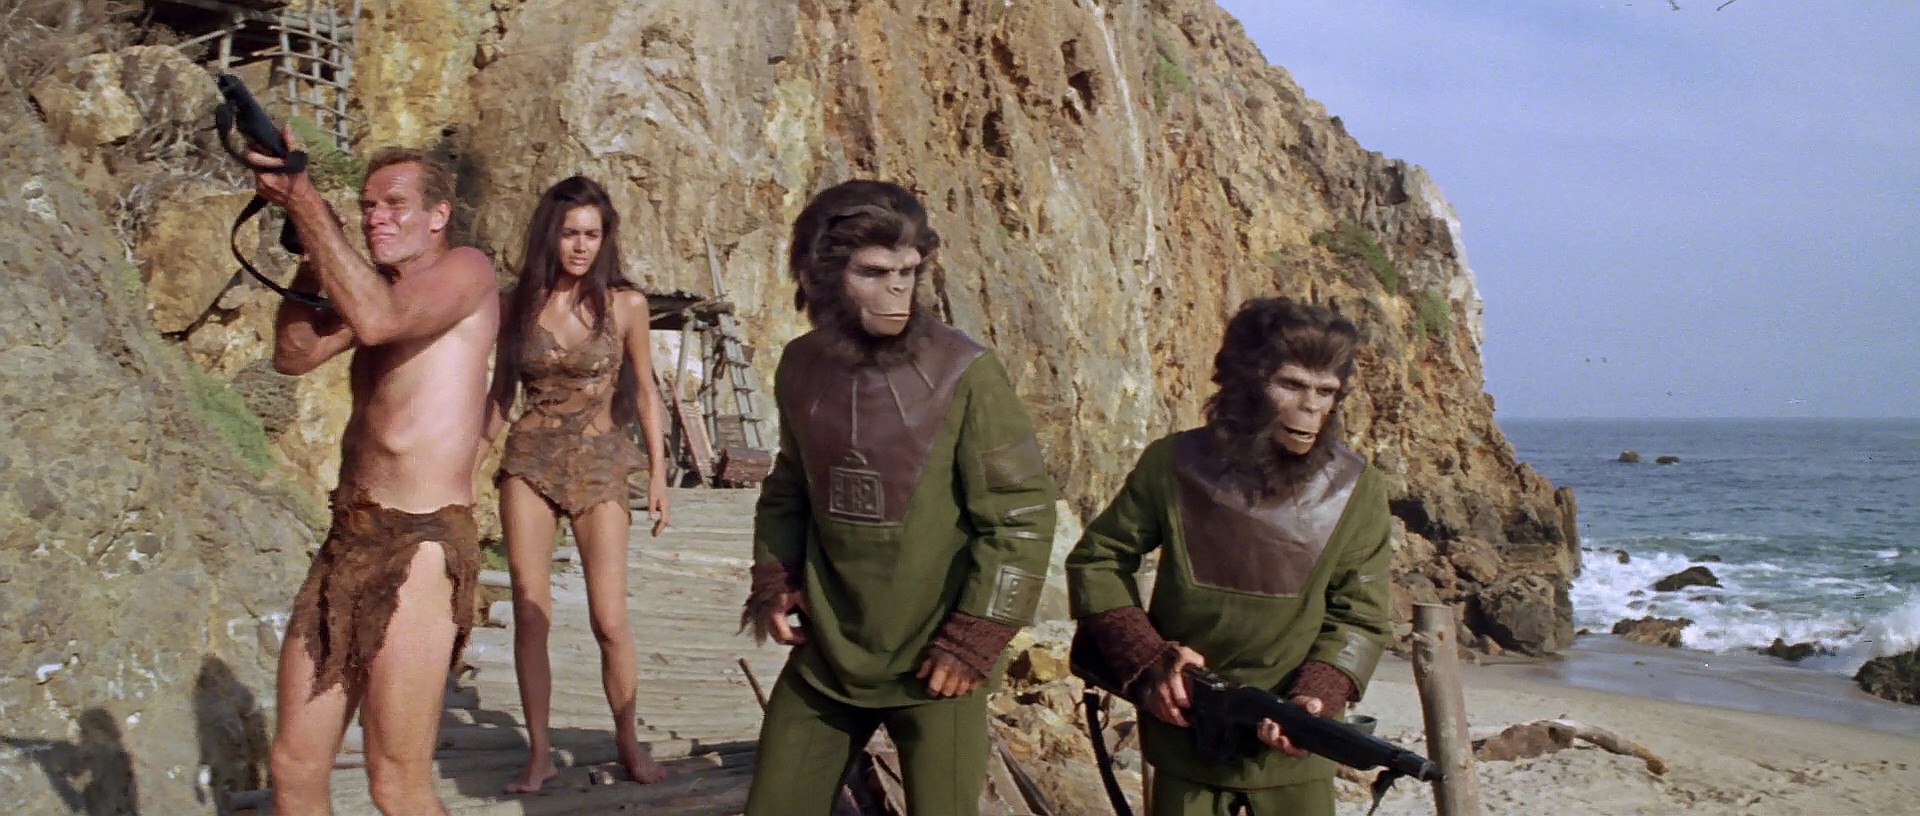 Planet of the Apes. 